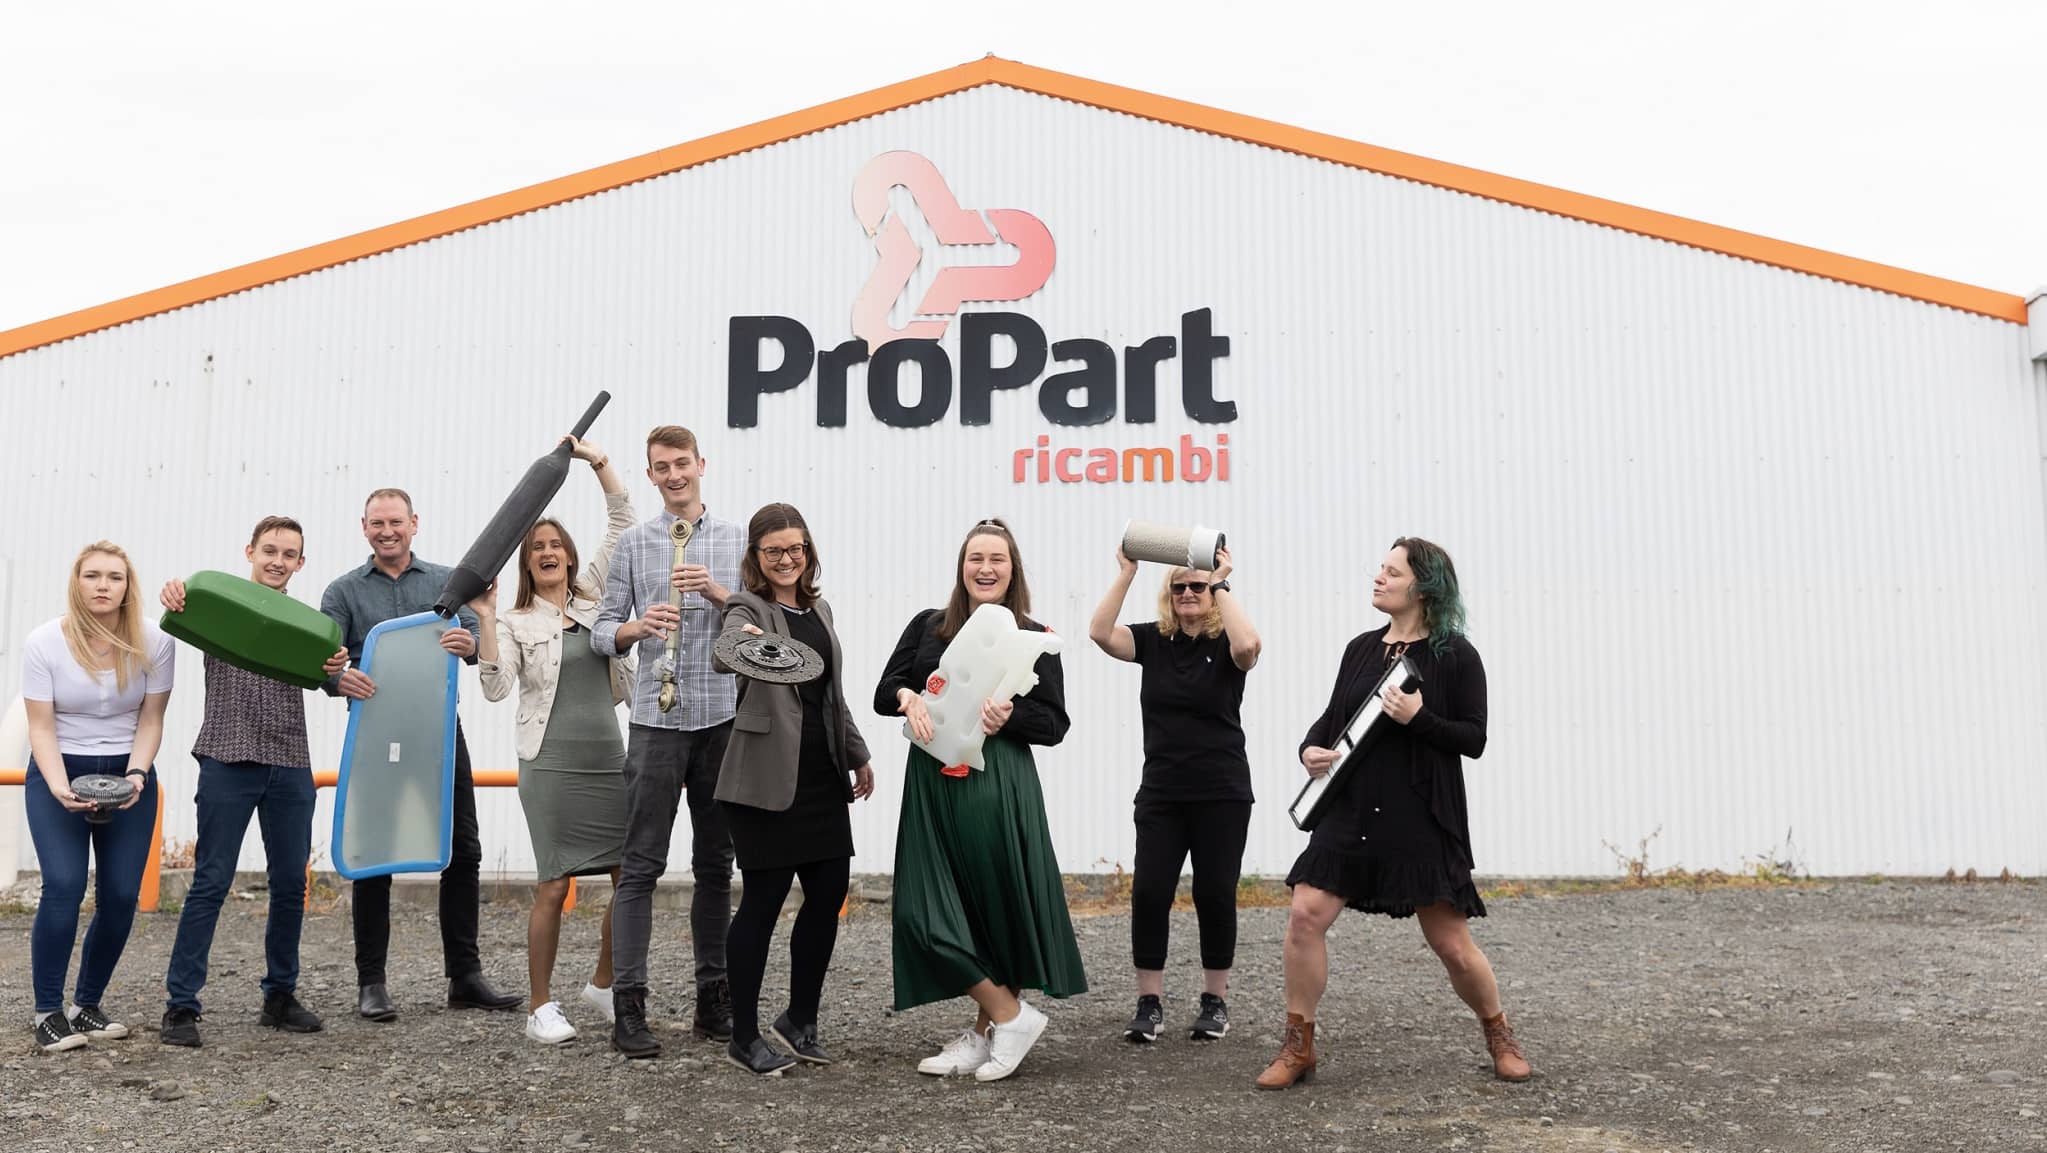 The ProPart team rocking out with their tractor parts